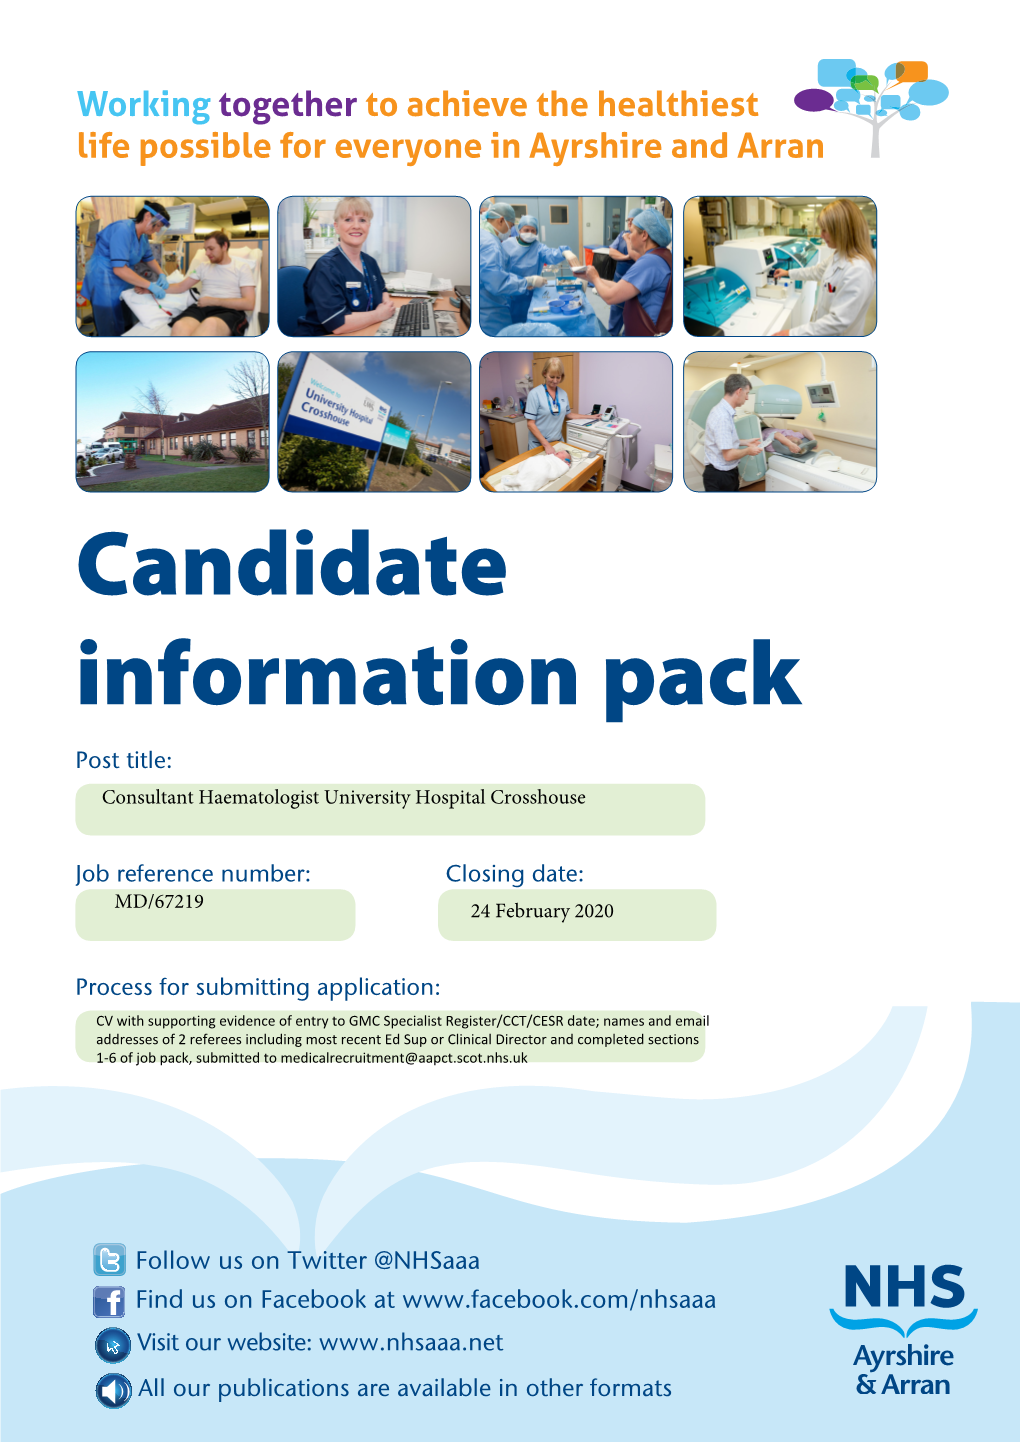 Candidate Information Pack Post Title: Consultant Haematologist University Hospital Crosshouse